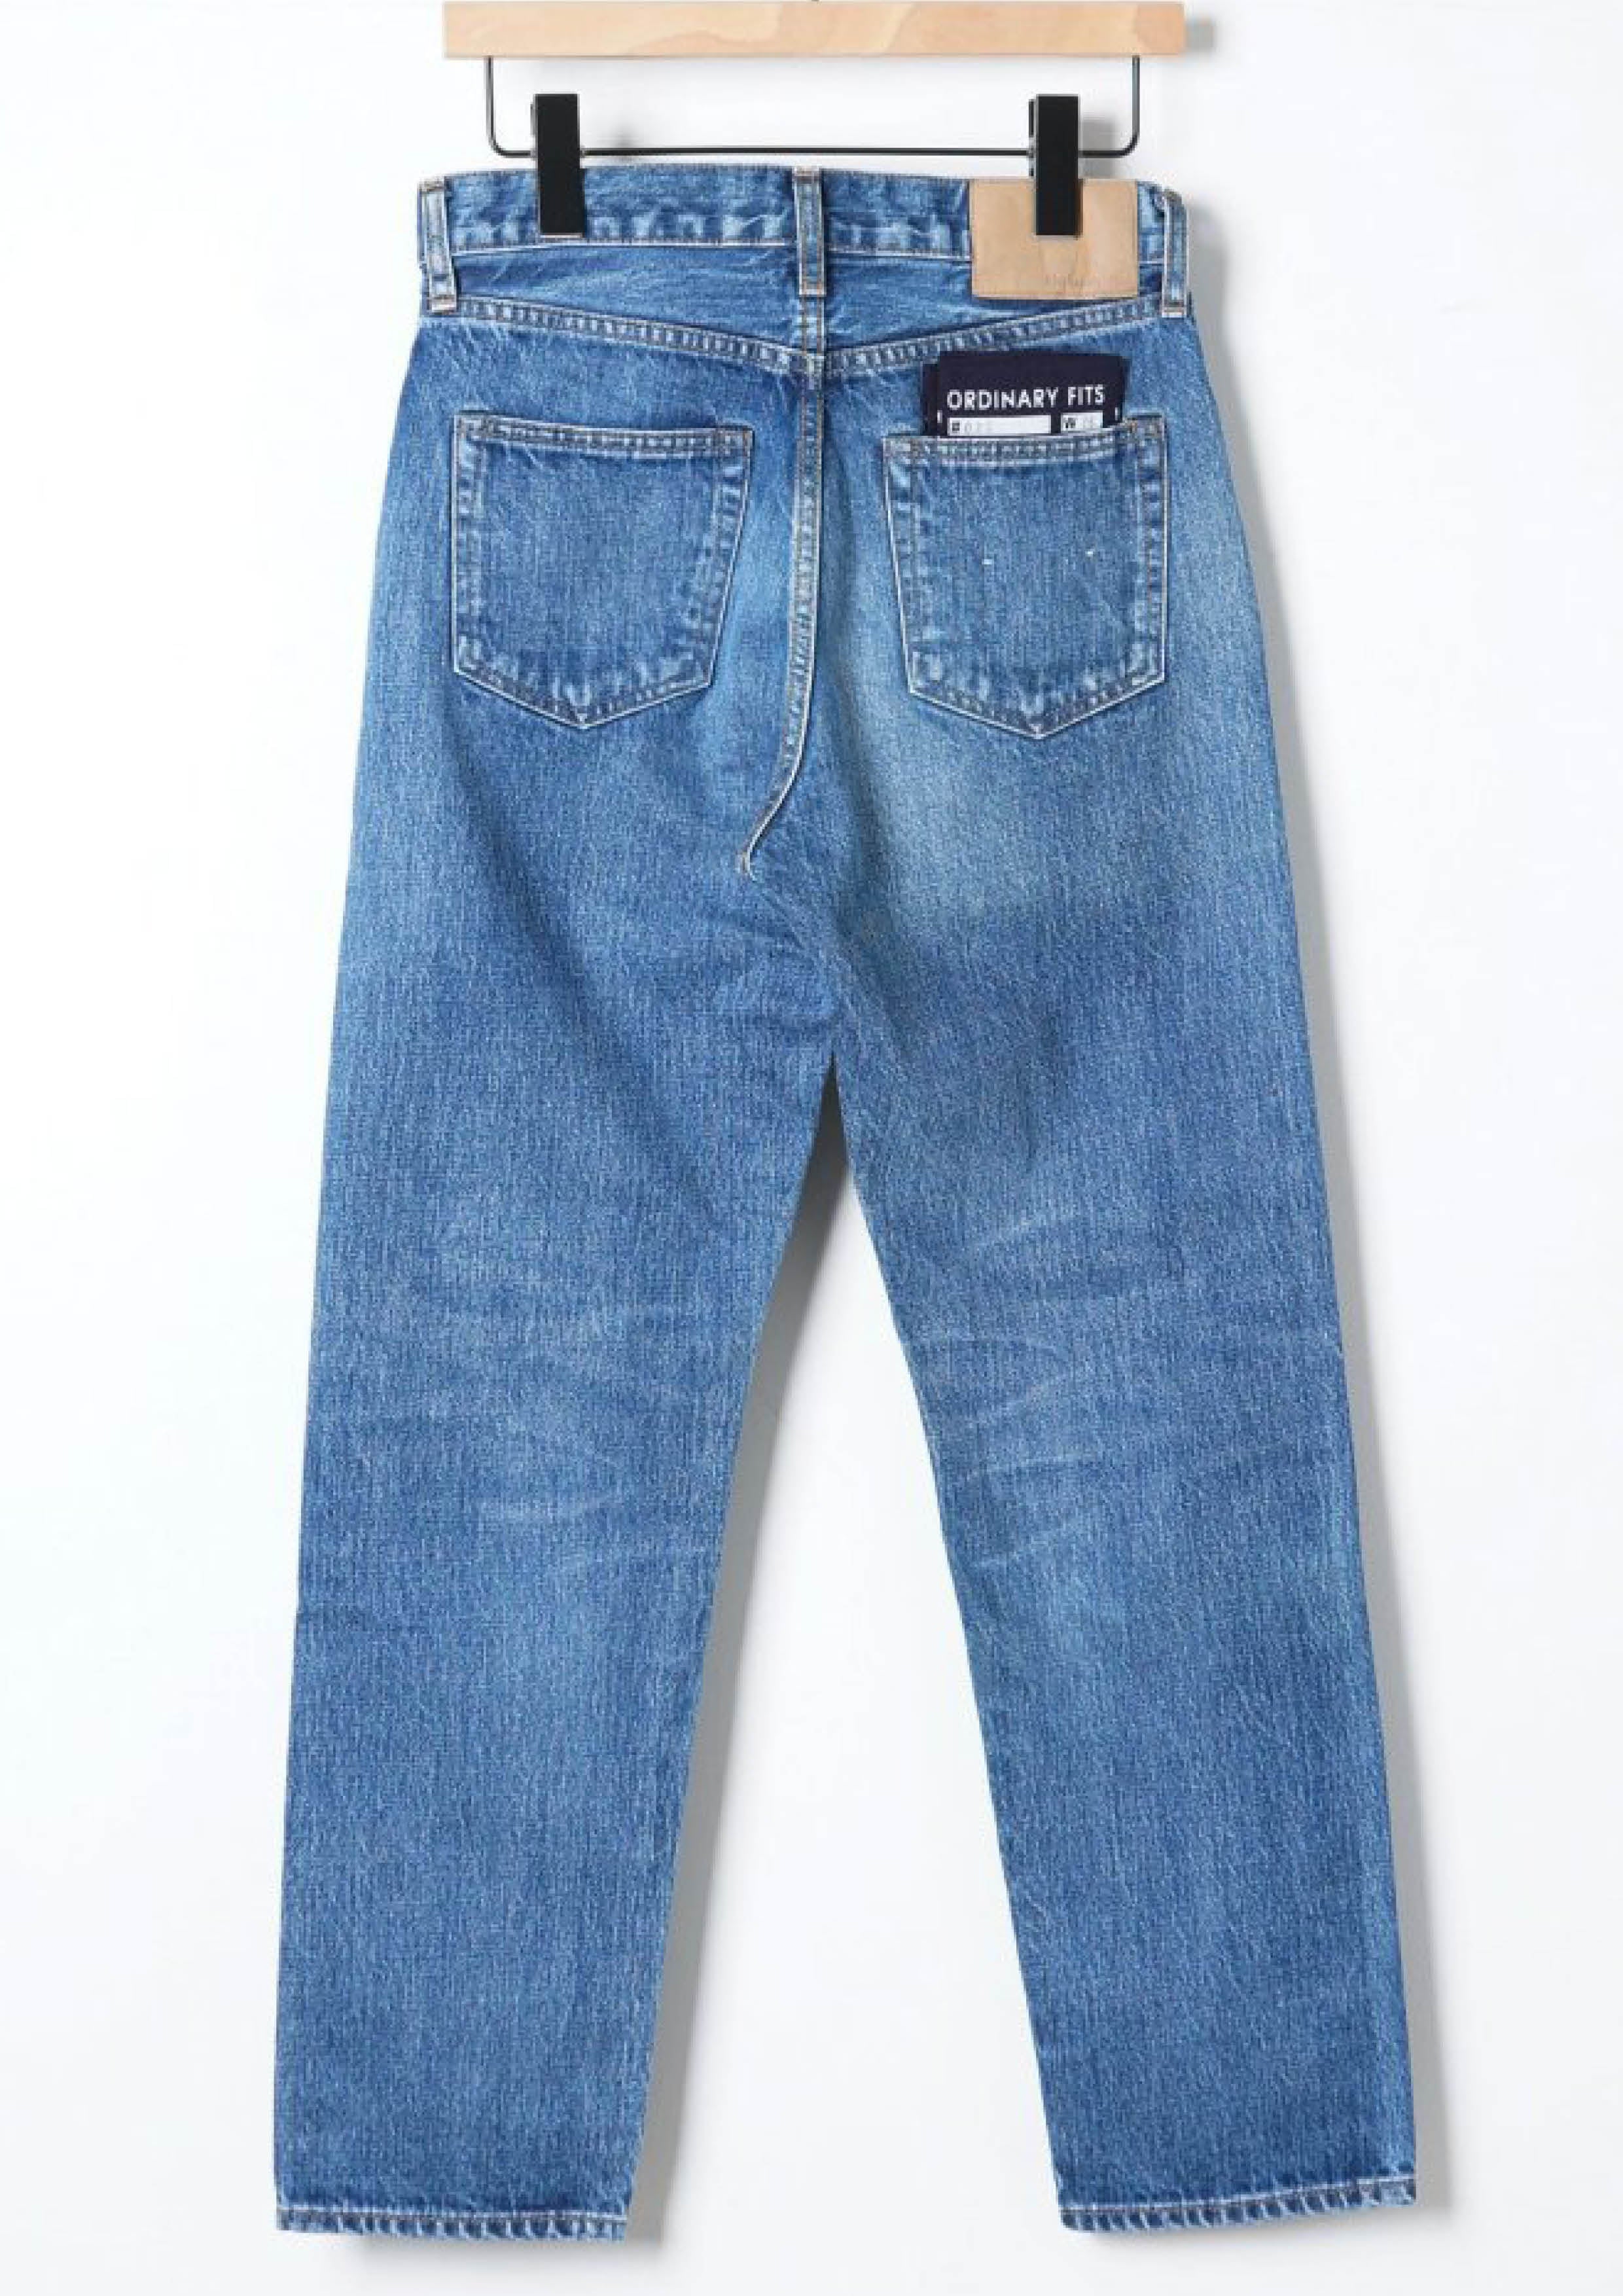 ORDINARY FITS - 5P ANKLE DENIM 3 YEAR